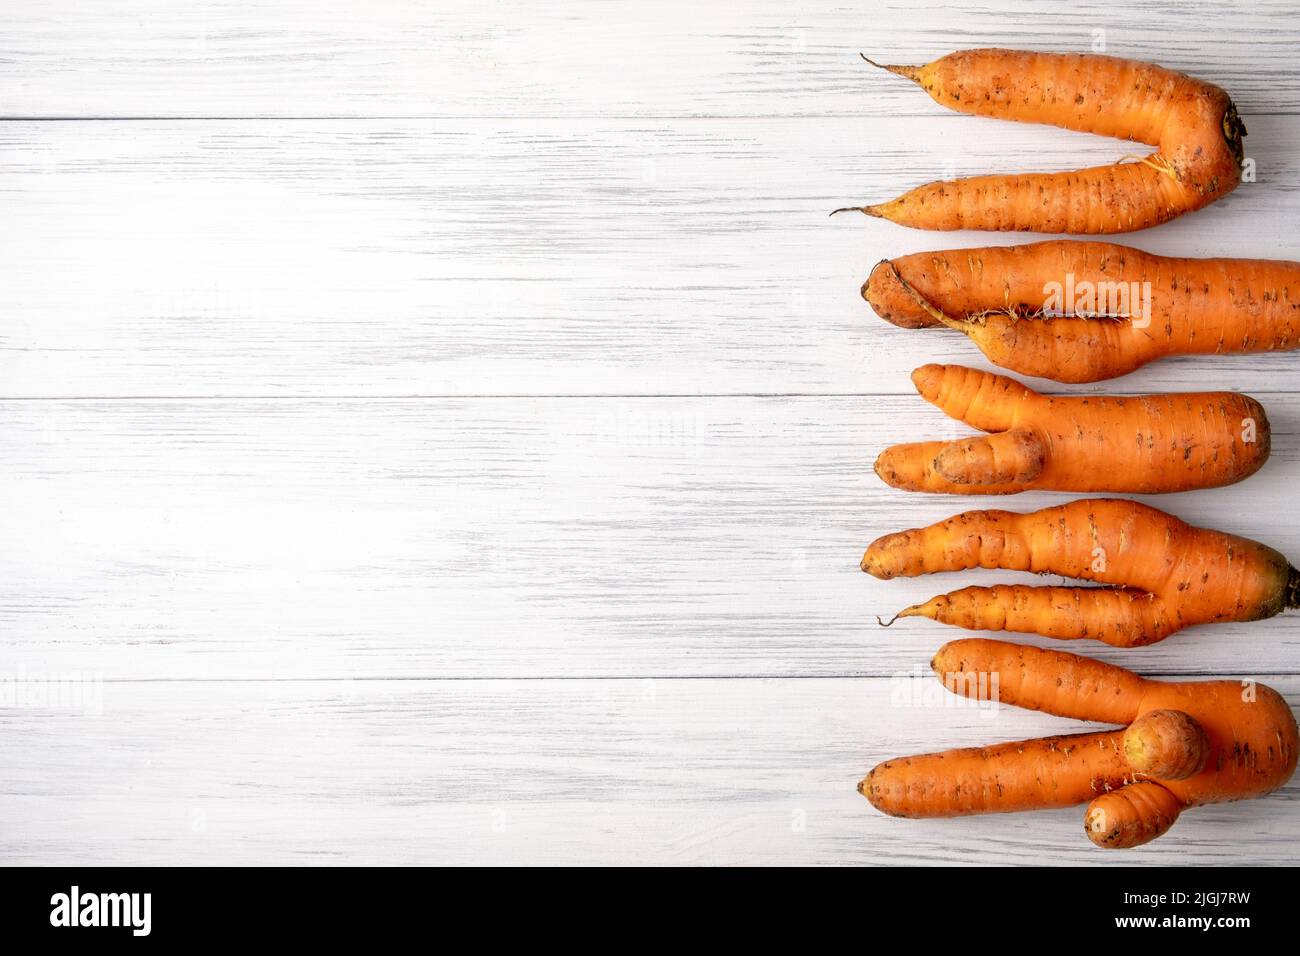 Top view close-up of several ripe orange ugly carrots lie on a light wooden surface with copy space for text. Selective focus. Stock Photo